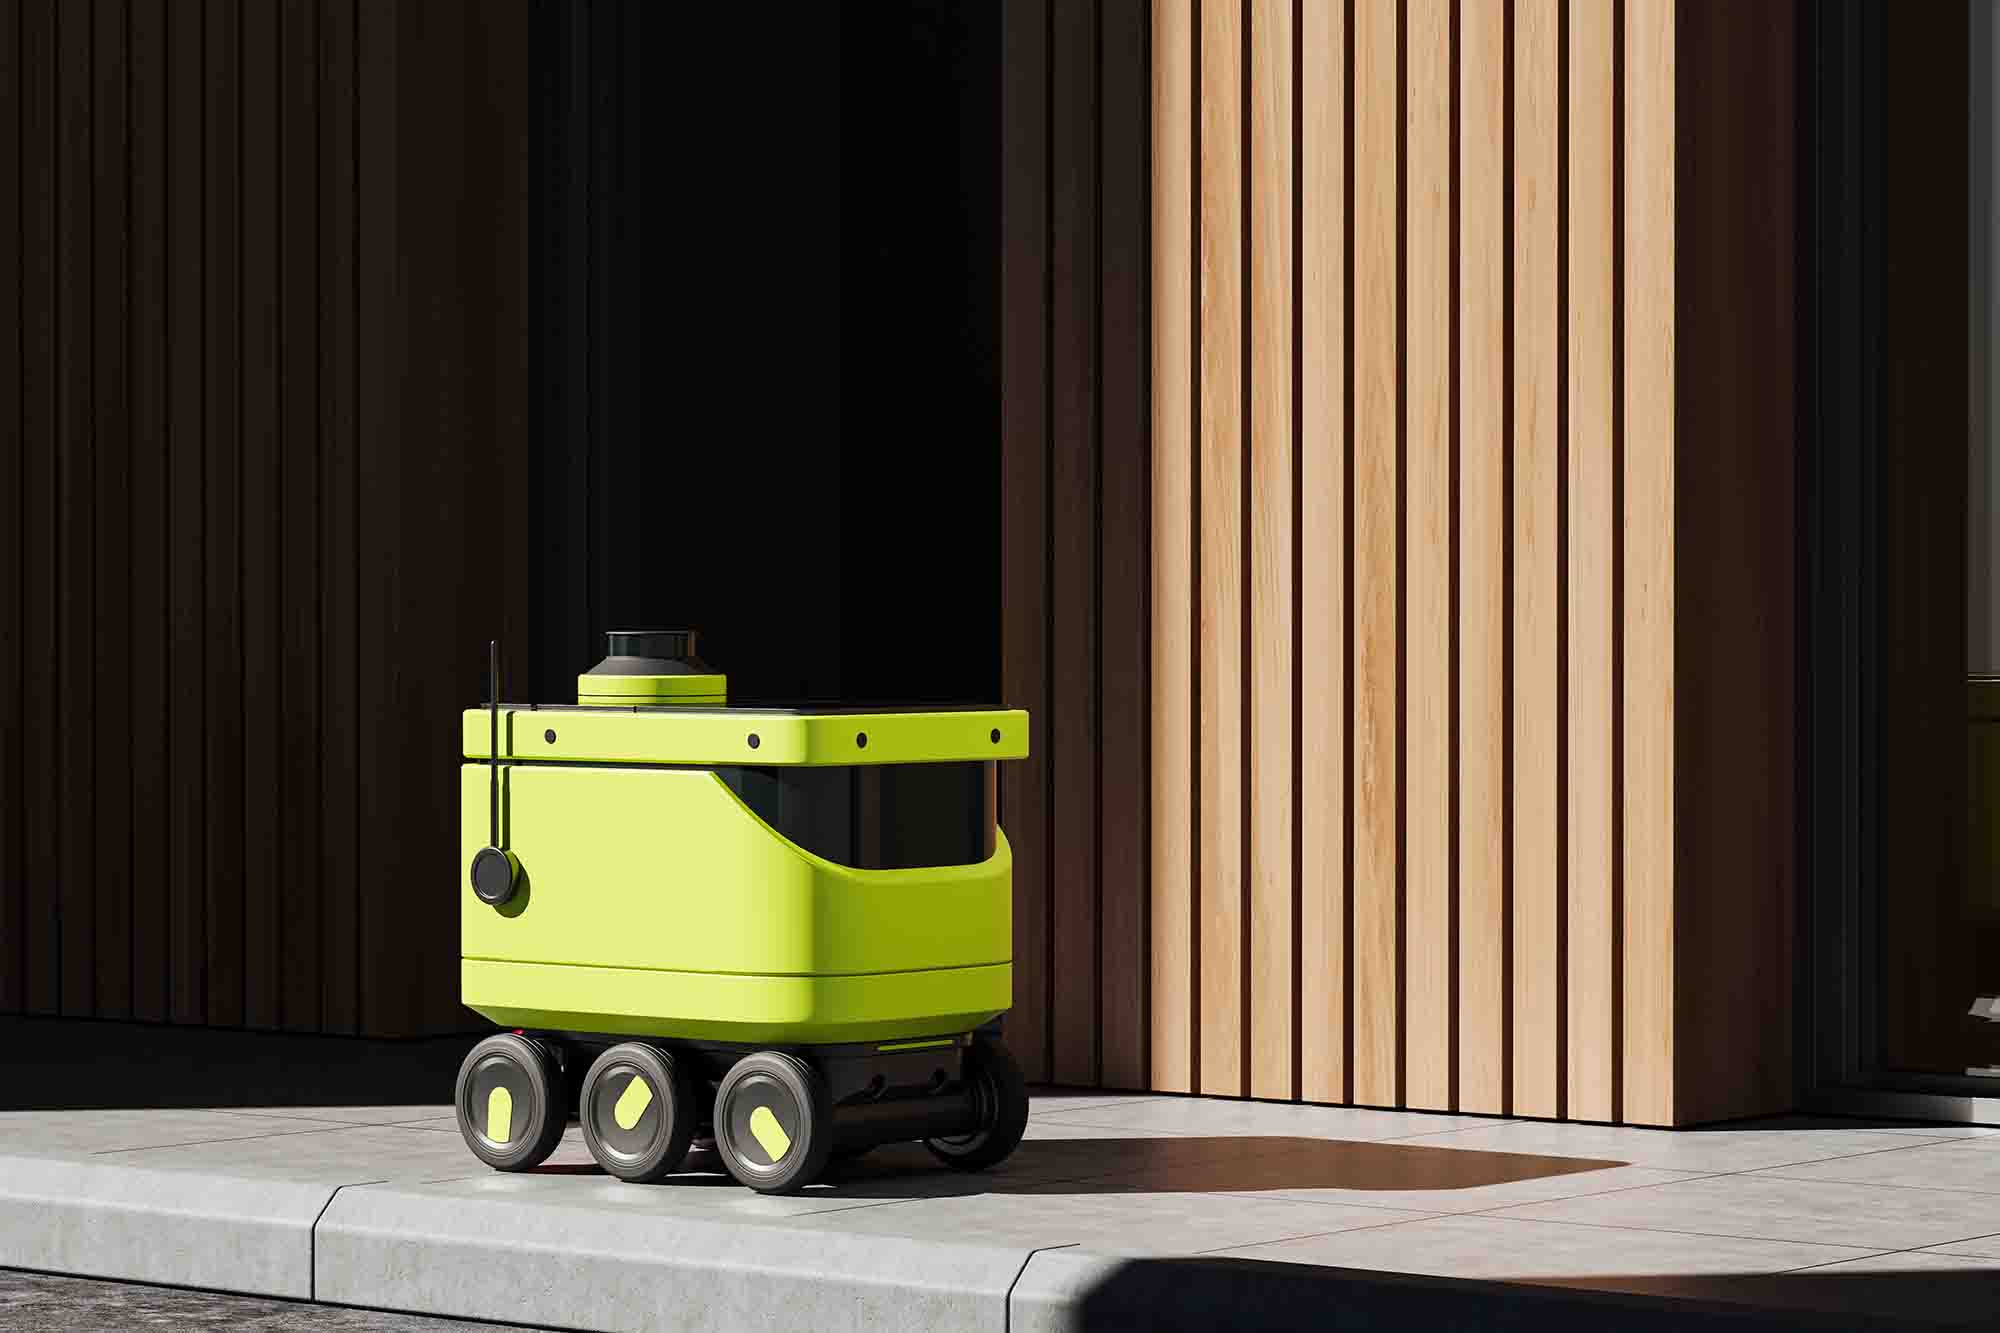 Yellow delivery robot, an innovative industrial design by top product design company, Speck Design